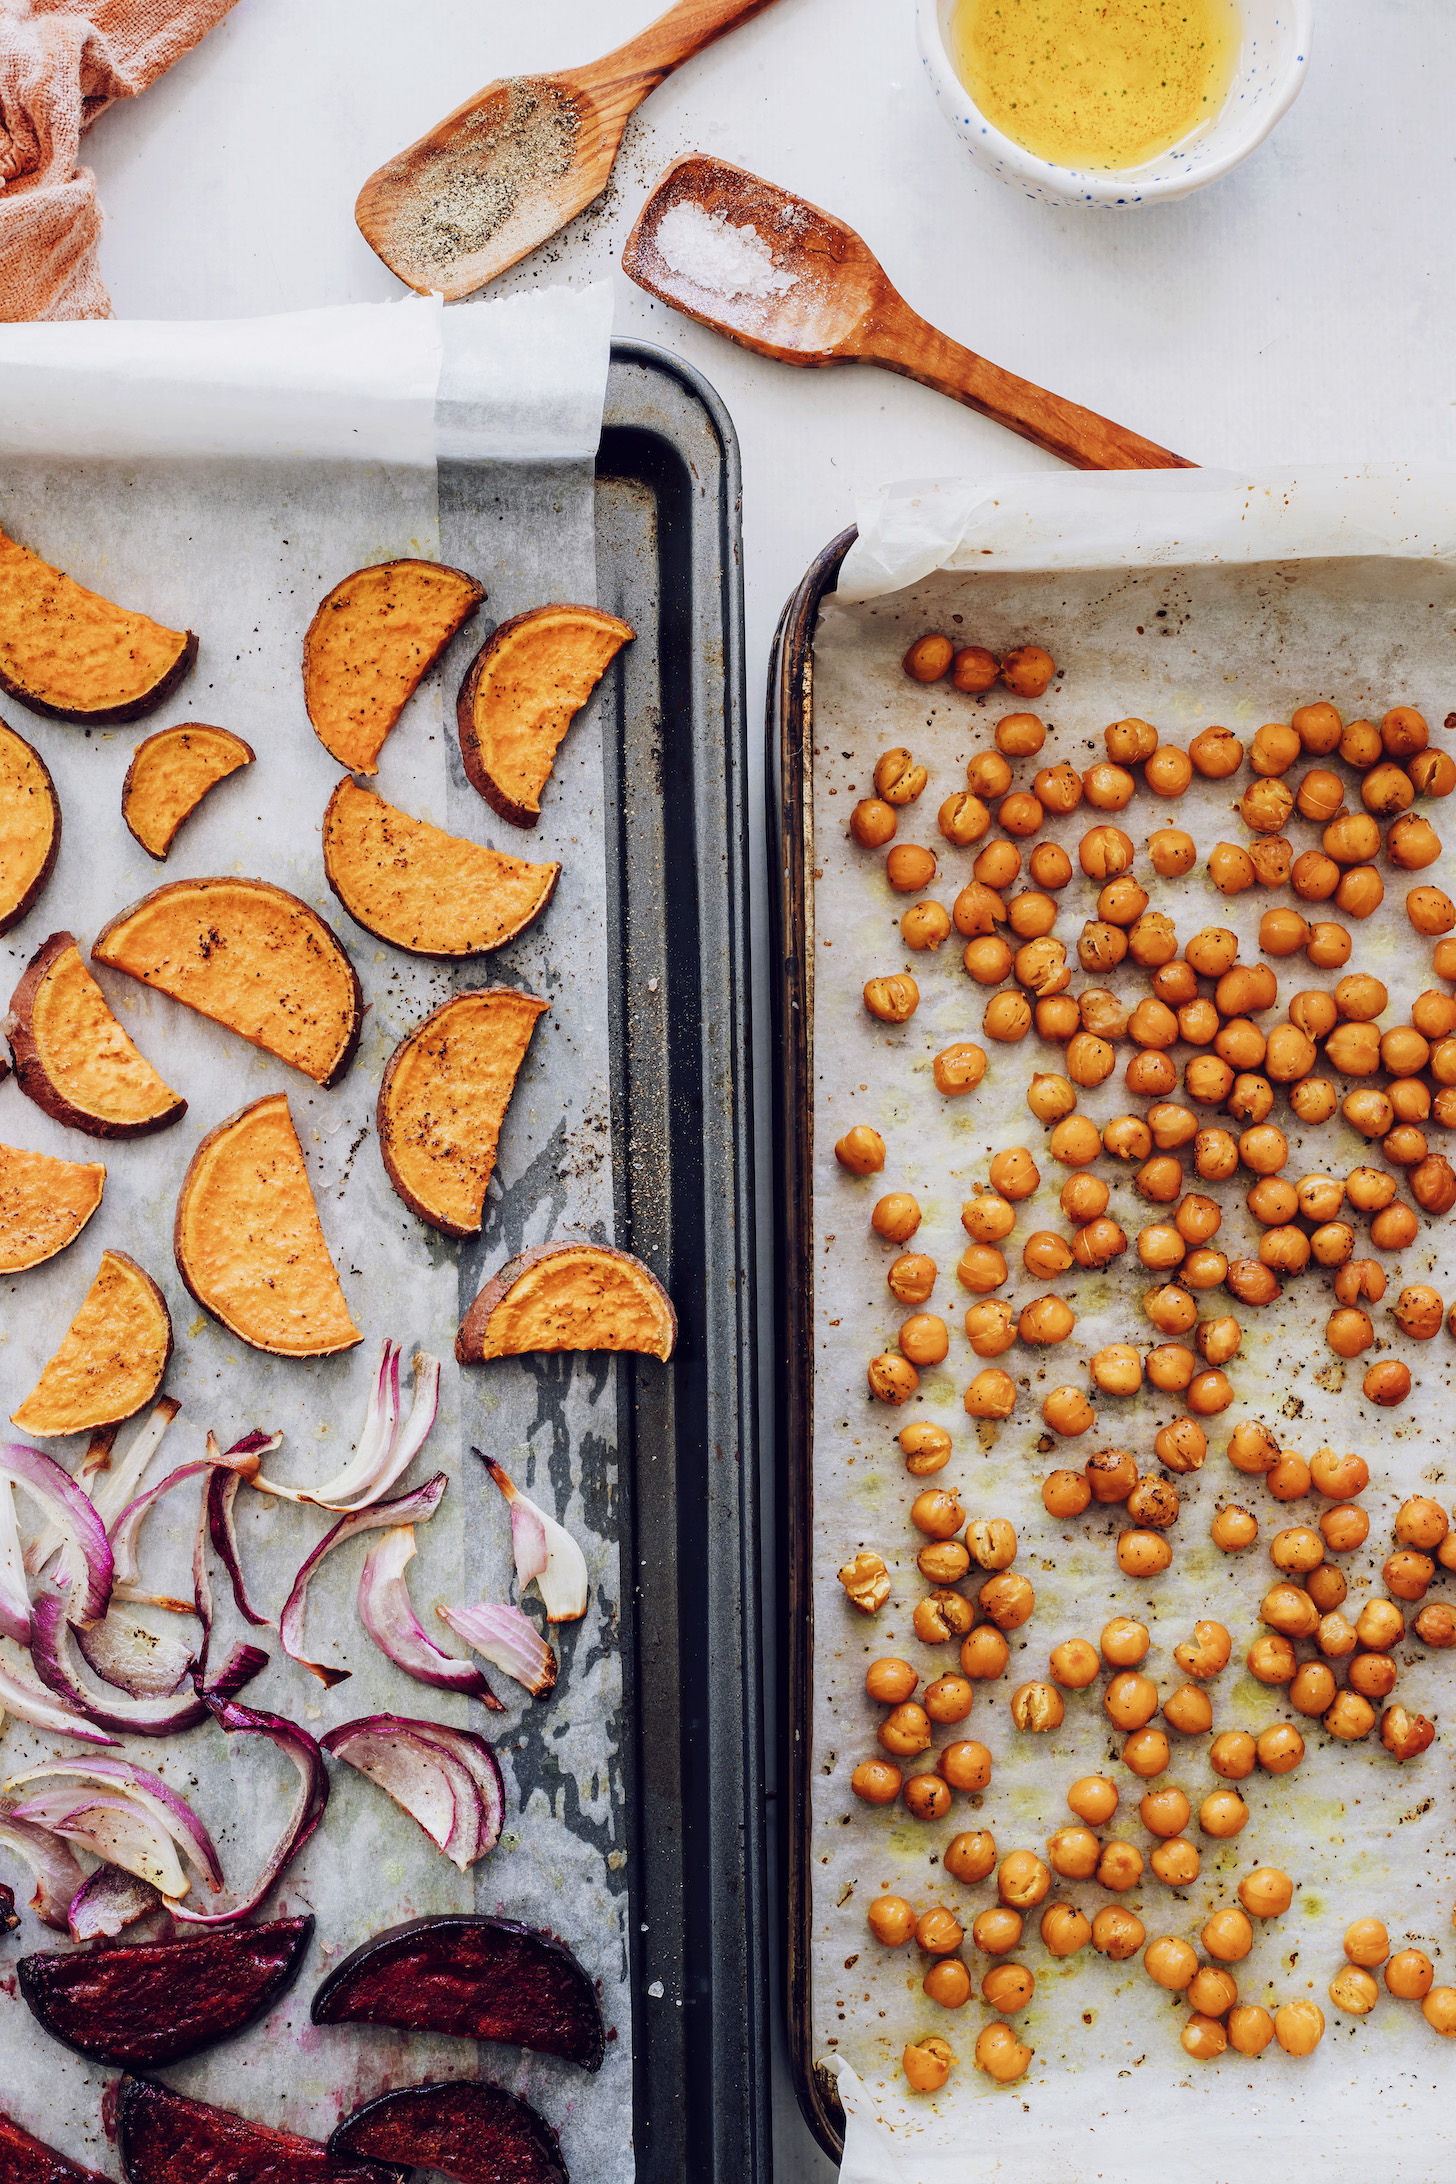 Pans of roasted root vegetables and chickpeas